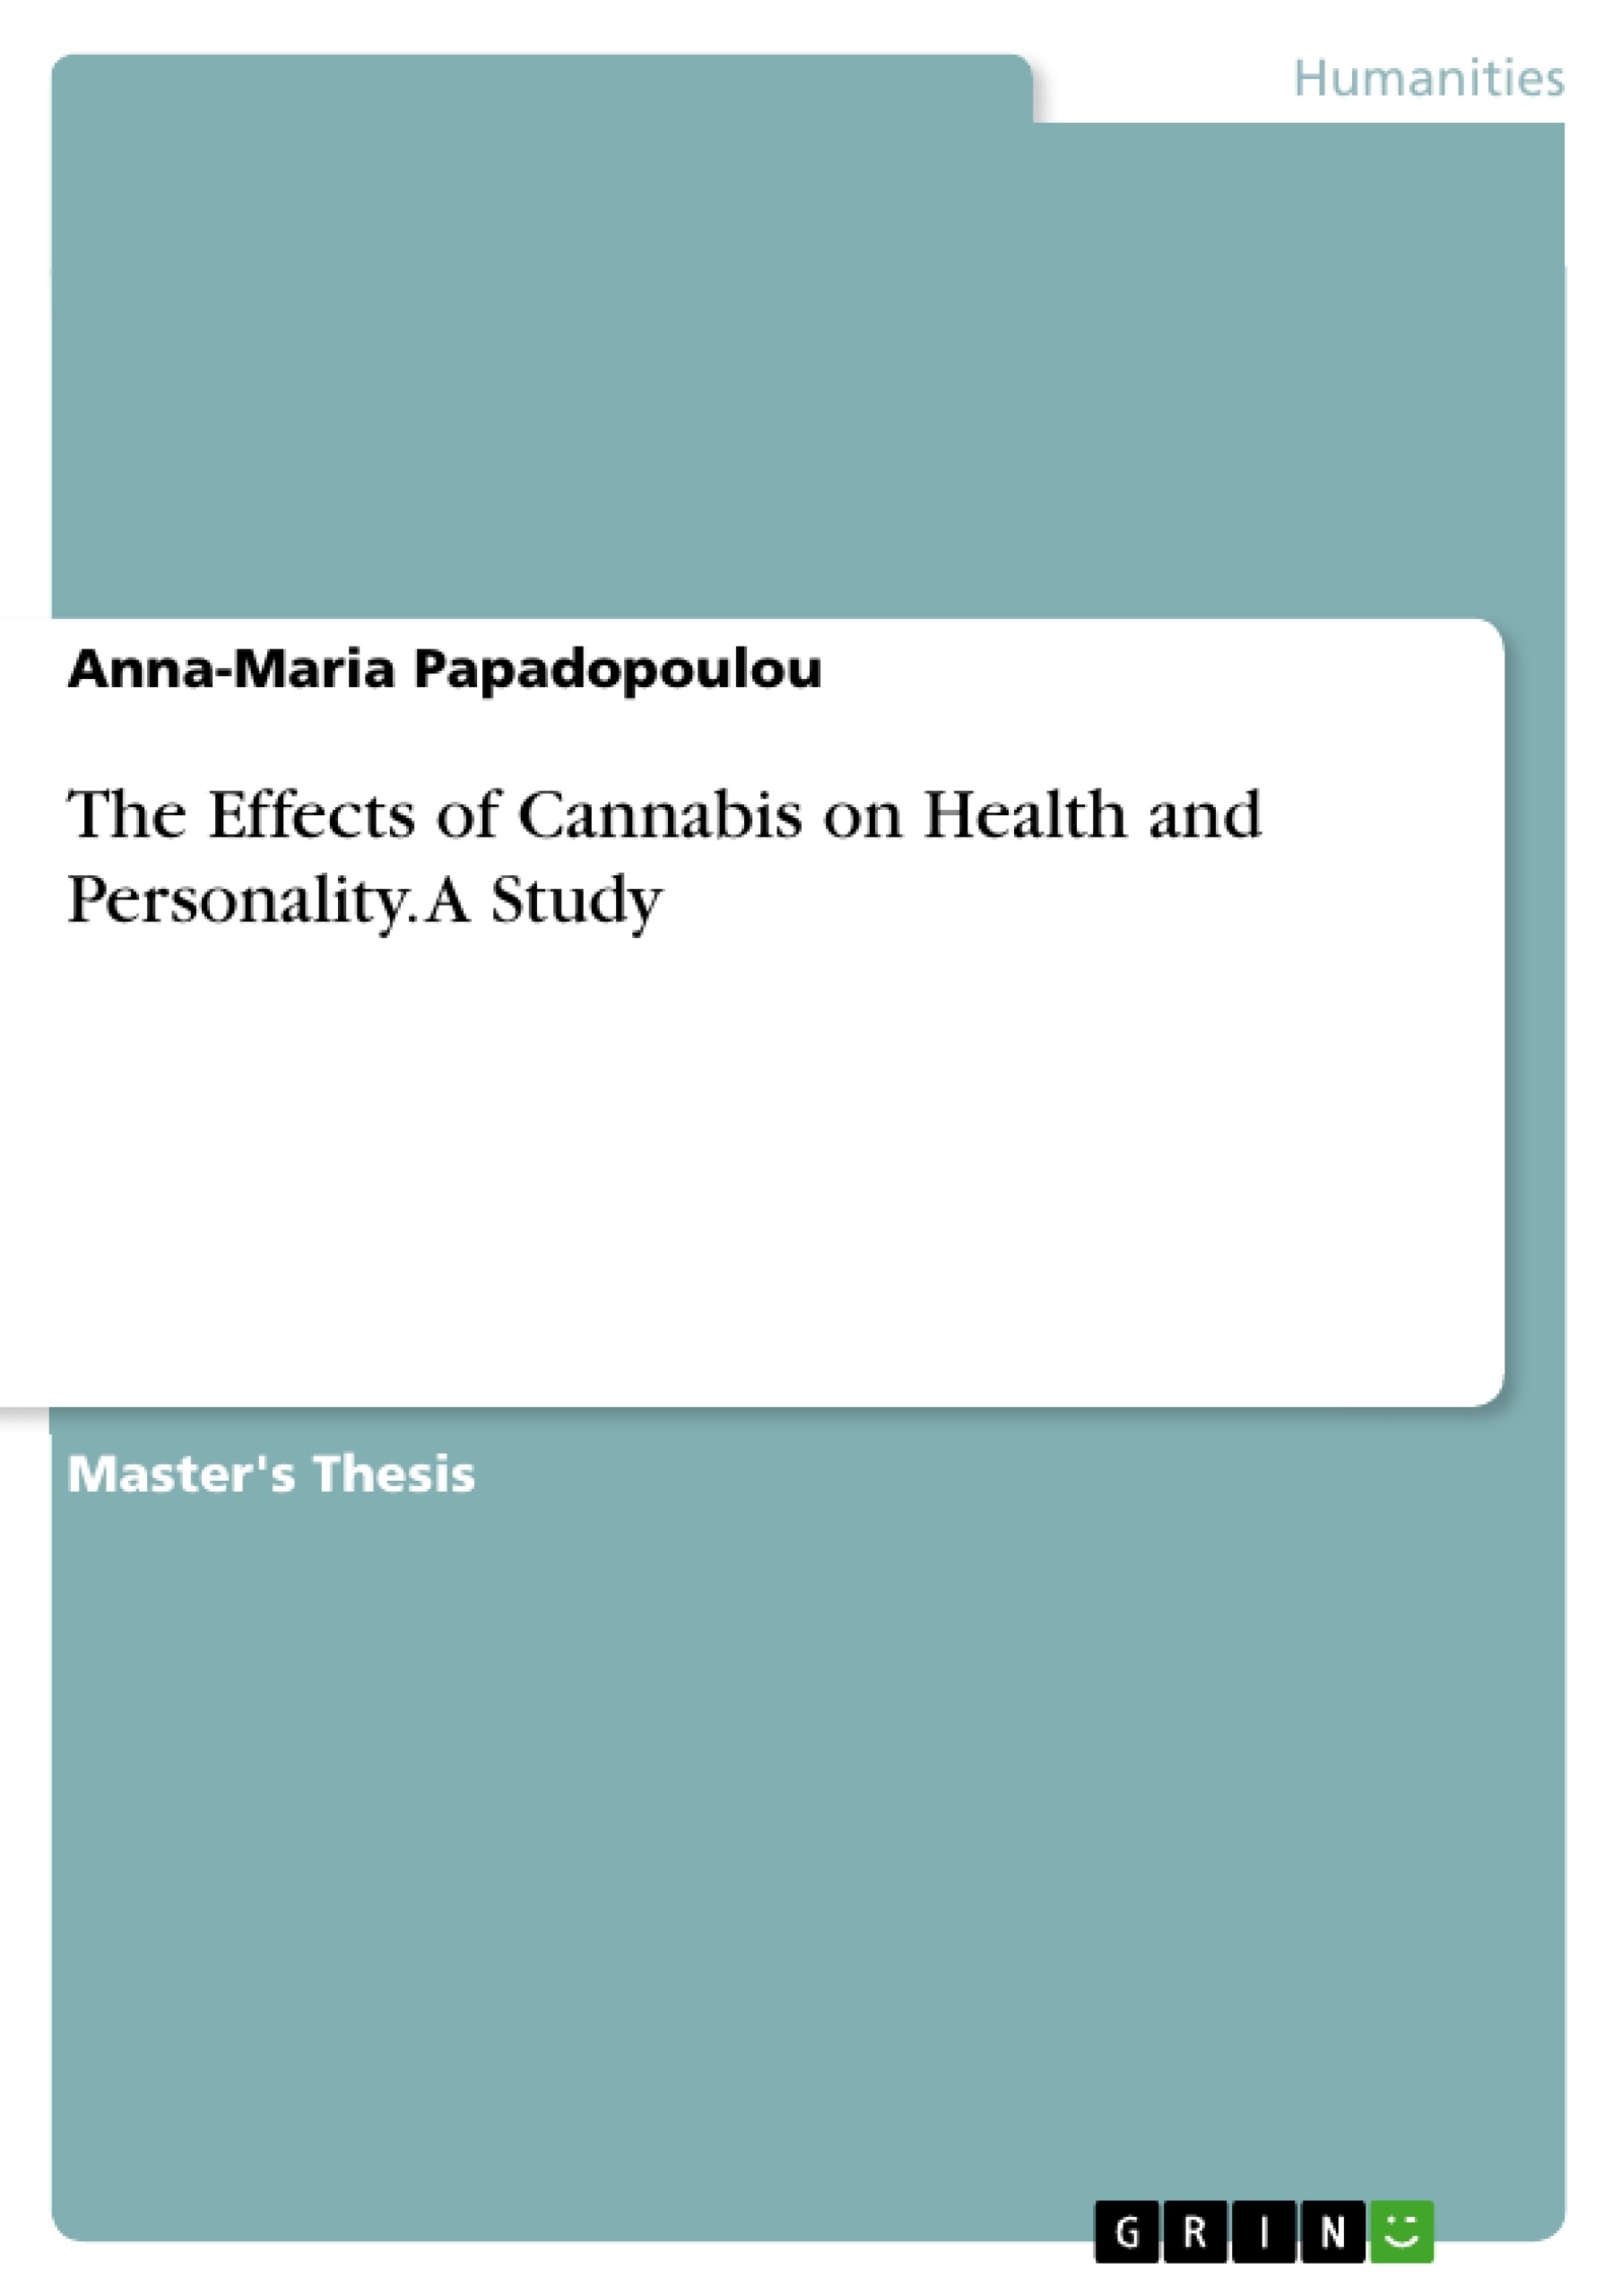 Título: The Effects of Cannabis on Health and Personality. A Study